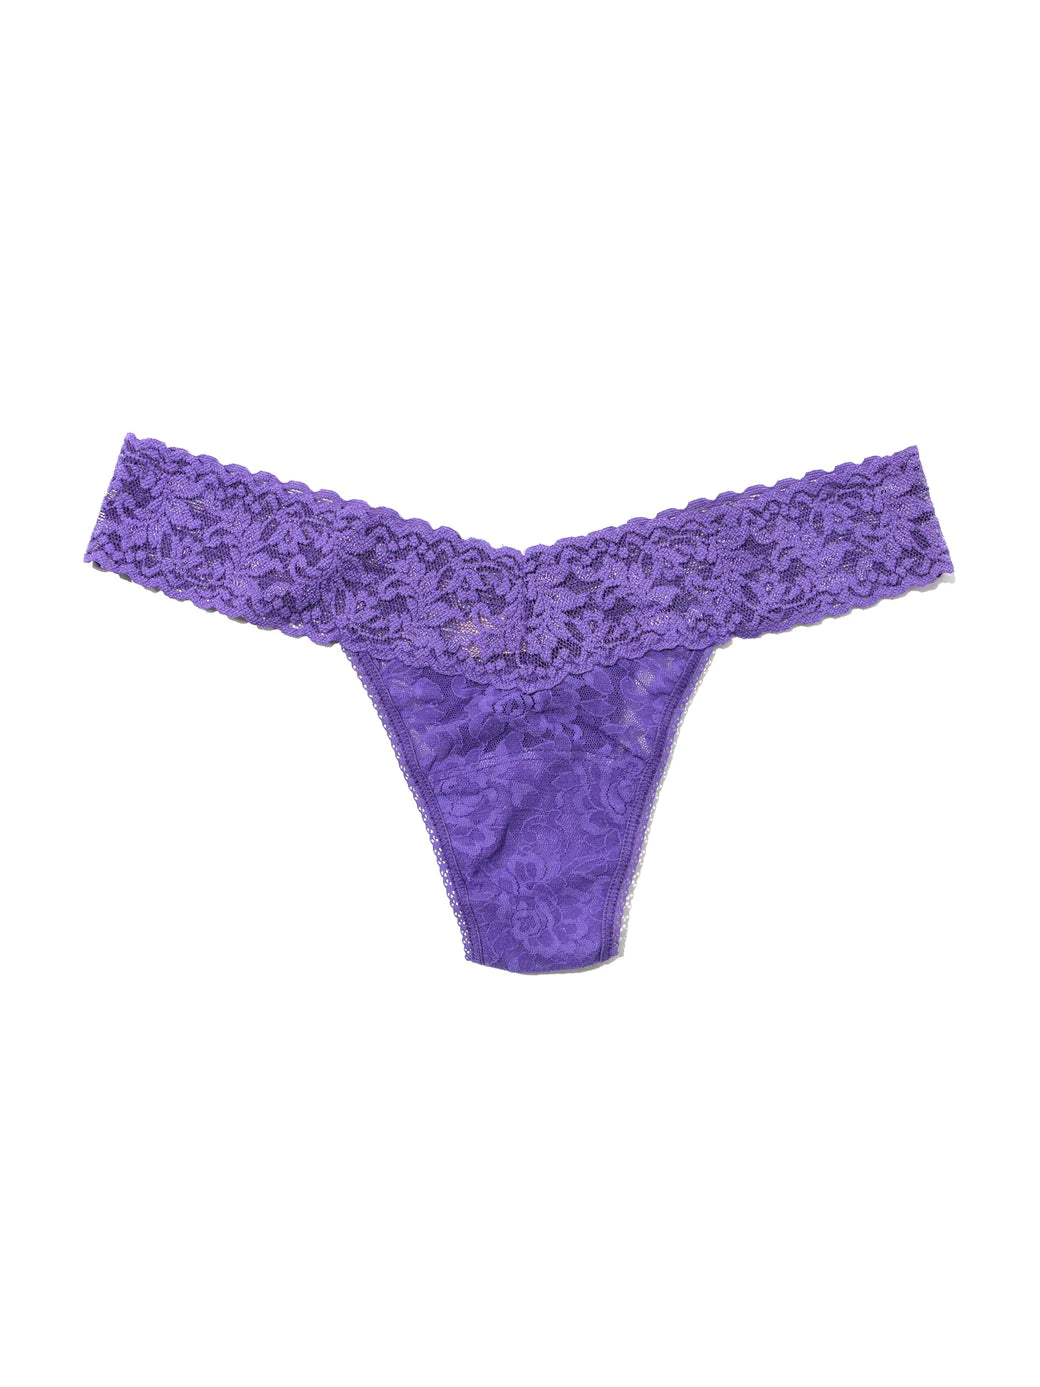 Hanky Panky Low Rise - Juniper Berry — Distinctively Hers